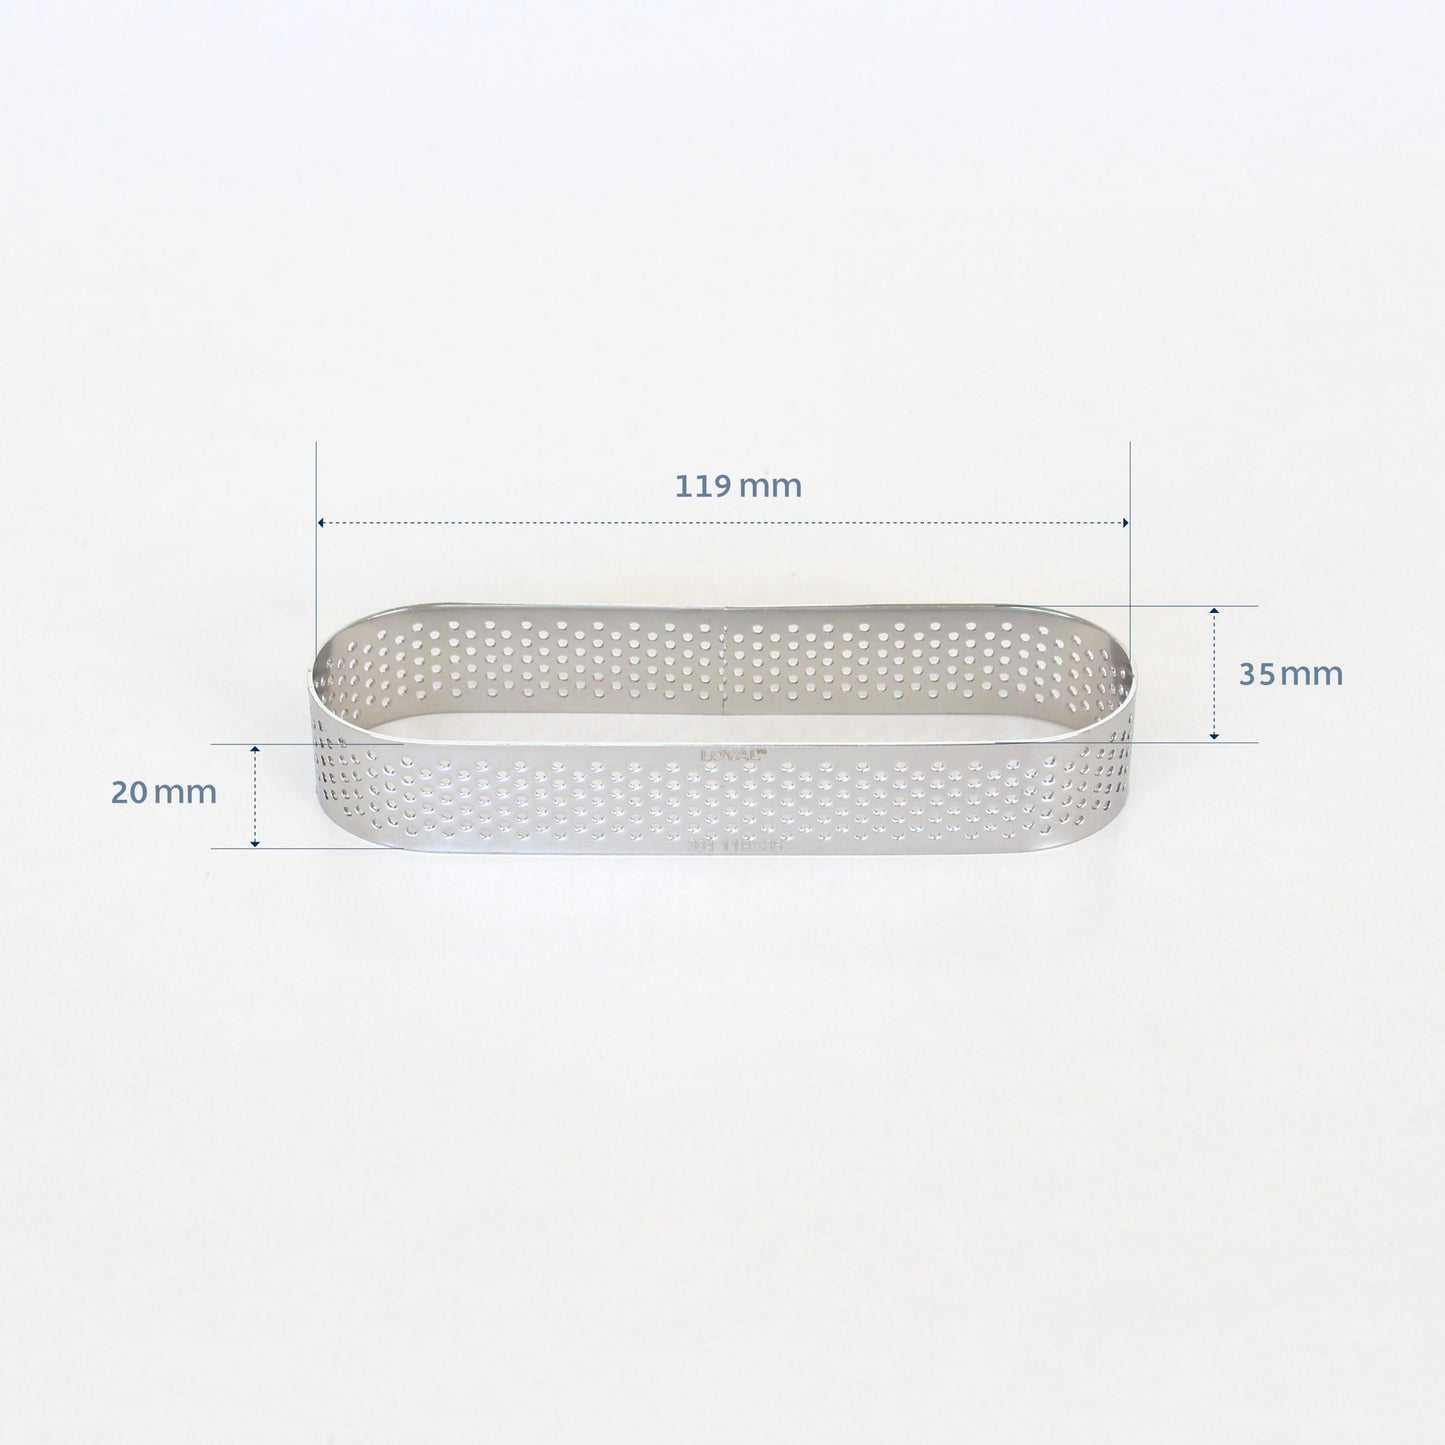 119mm PERFORATED RING S/S